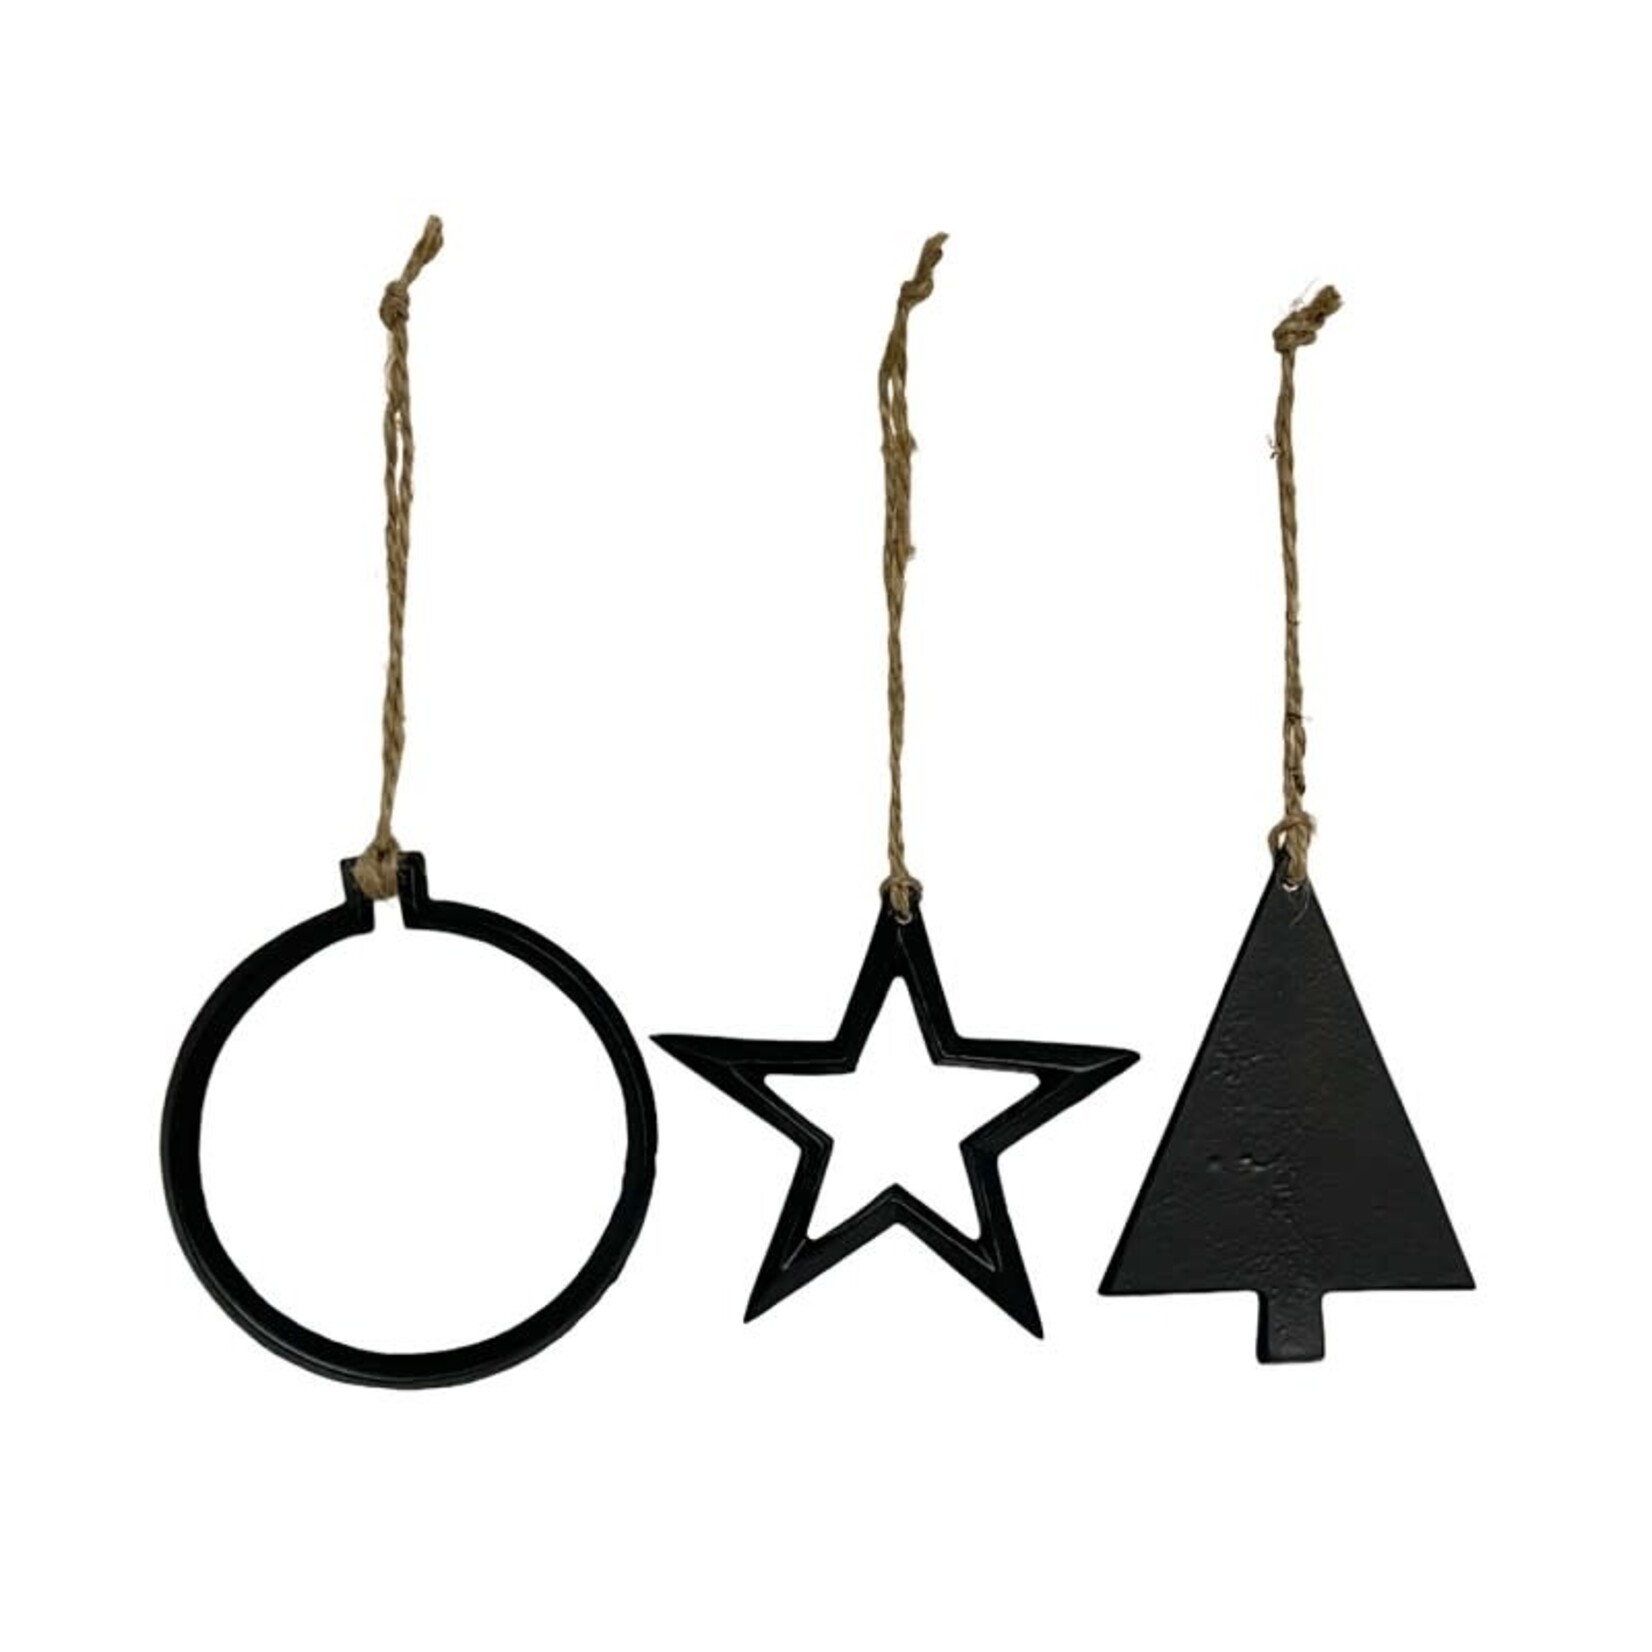 Home Society Ornament Nordic kerstboom